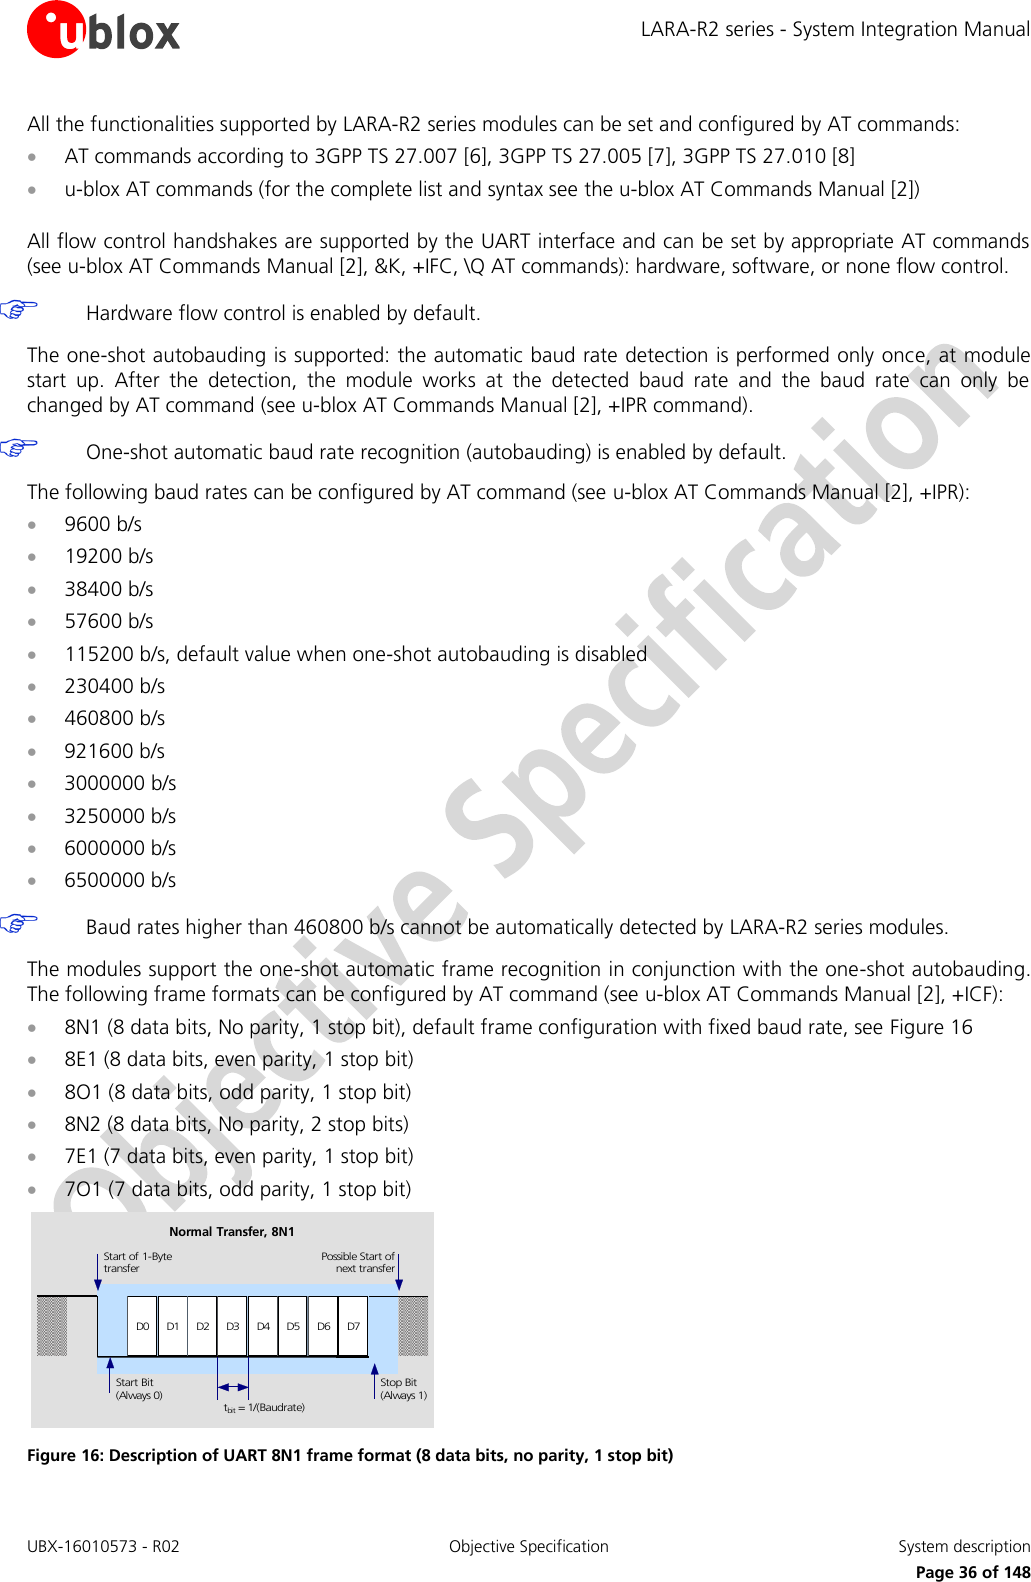 LARA-R2 series - System Integration Manual UBX-16010573 - R02  Objective Specification  System description     Page 36 of 148 All the functionalities supported by LARA-R2 series modules can be set and configured by AT commands:  AT commands according to 3GPP TS 27.007 [6], 3GPP TS 27.005 [7], 3GPP TS 27.010 [8]  u-blox AT commands (for the complete list and syntax see the u-blox AT Commands Manual [2])  All flow control handshakes are supported by the UART interface and can be set by appropriate AT commands (see u-blox AT Commands Manual [2], &amp;K, +IFC, \Q AT commands): hardware, software, or none flow control.   Hardware flow control is enabled by default.  The one-shot autobauding is supported: the automatic baud rate detection is performed only once, at module start  up.  After  the  detection,  the  module  works  at  the  detected  baud  rate  and  the  baud  rate  can  only  be changed by AT command (see u-blox AT Commands Manual [2], +IPR command).   One-shot automatic baud rate recognition (autobauding) is enabled by default.  The following baud rates can be configured by AT command (see u-blox AT Commands Manual [2], +IPR):  9600 b/s  19200 b/s  38400 b/s  57600 b/s  115200 b/s, default value when one-shot autobauding is disabled  230400 b/s  460800 b/s  921600 b/s  3000000 b/s  3250000 b/s  6000000 b/s  6500000 b/s   Baud rates higher than 460800 b/s cannot be automatically detected by LARA-R2 series modules.  The modules support the one-shot automatic frame recognition in conjunction with the one-shot autobauding. The following frame formats can be configured by AT command (see u-blox AT Commands Manual [2], +ICF):  8N1 (8 data bits, No parity, 1 stop bit), default frame configuration with fixed baud rate, see Figure 16  8E1 (8 data bits, even parity, 1 stop bit)  8O1 (8 data bits, odd parity, 1 stop bit)  8N2 (8 data bits, No parity, 2 stop bits)  7E1 (7 data bits, even parity, 1 stop bit)  7O1 (7 data bits, odd parity, 1 stop bit) D0 D1 D2 D3 D4 D5 D6 D7Start of 1-BytetransferStart Bit(Always 0)Possible Start ofnext transferStop Bit(Always 1)tbit = 1/(Baudrate)Normal Transfer, 8N1 Figure 16: Description of UART 8N1 frame format (8 data bits, no parity, 1 stop bit)   